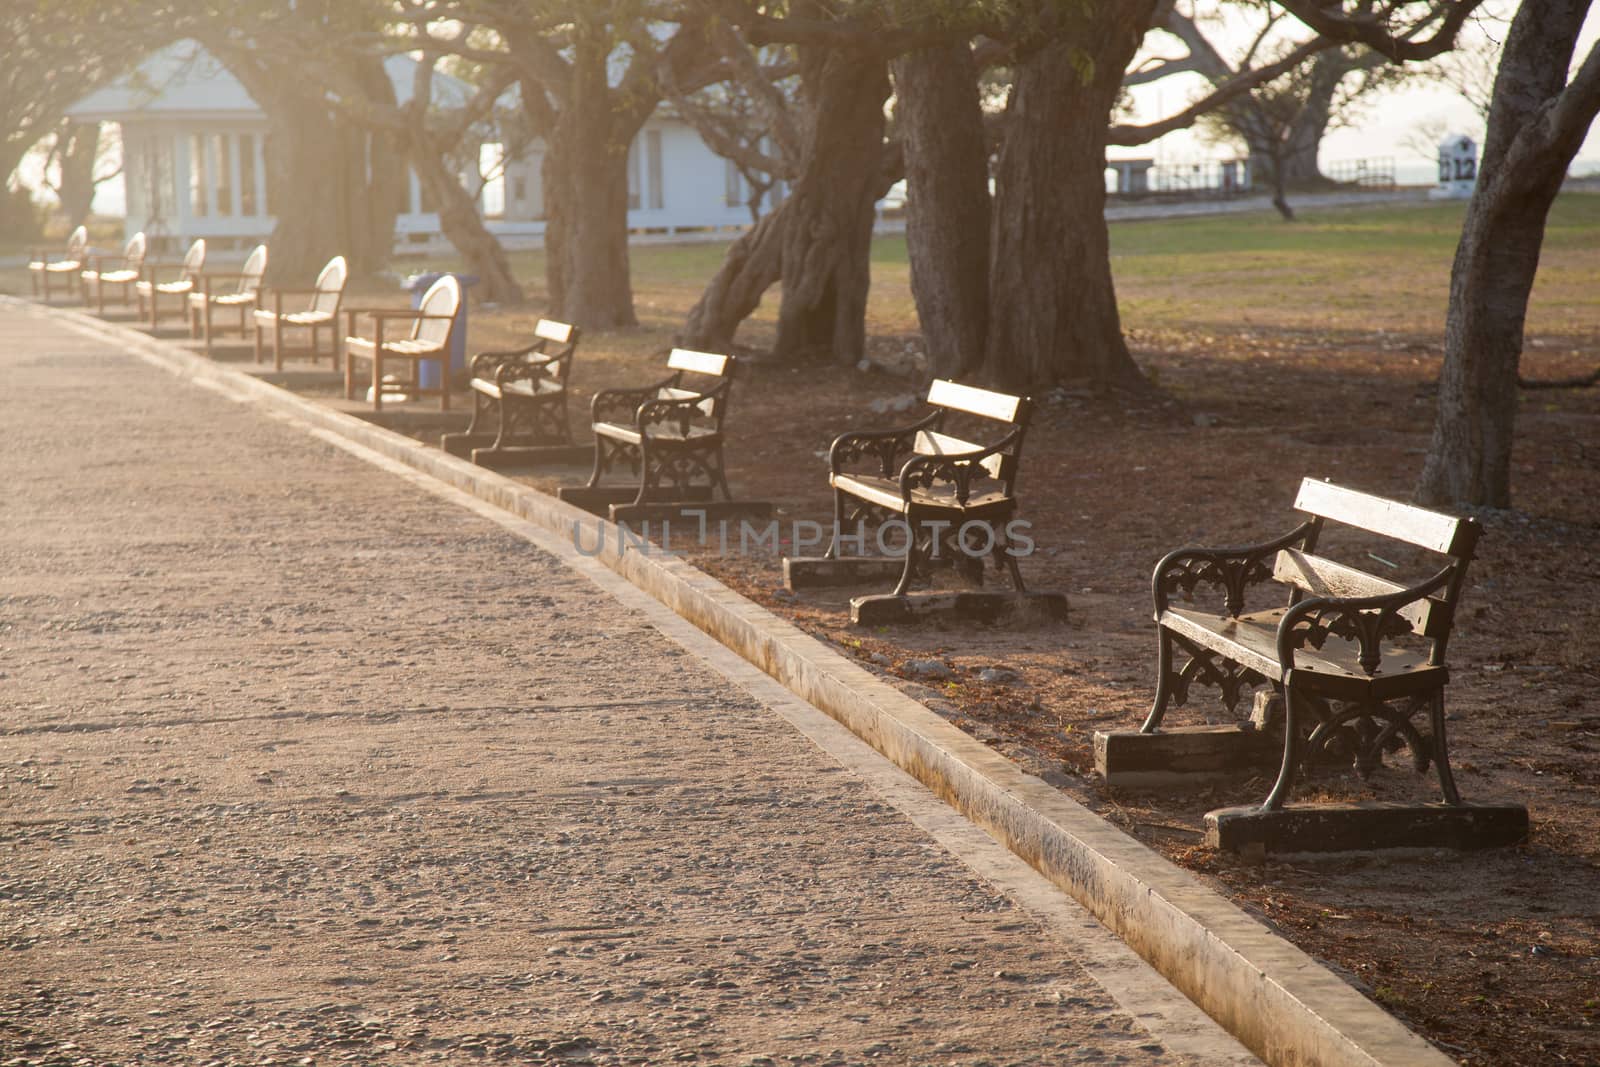 Benches along the walkway. Under the trees in the morning sun reflected.